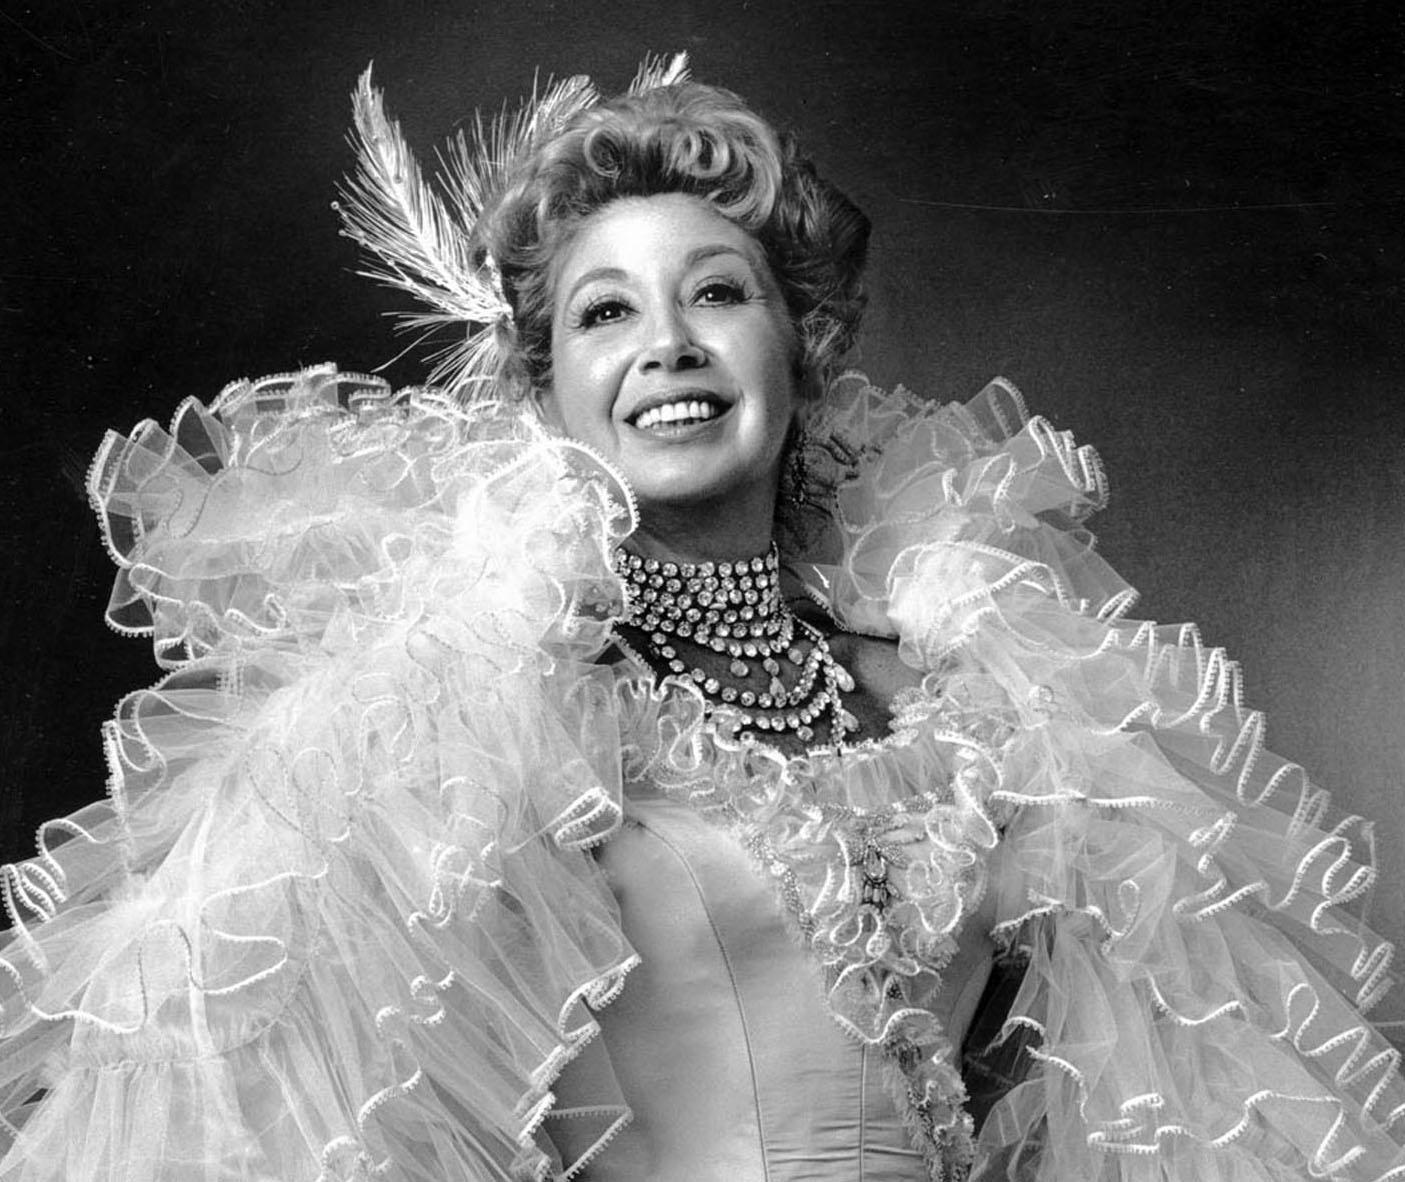  Beverly Sills in New York City Opera's 'The Merry Widow' - Photograph by Jack Mitchell